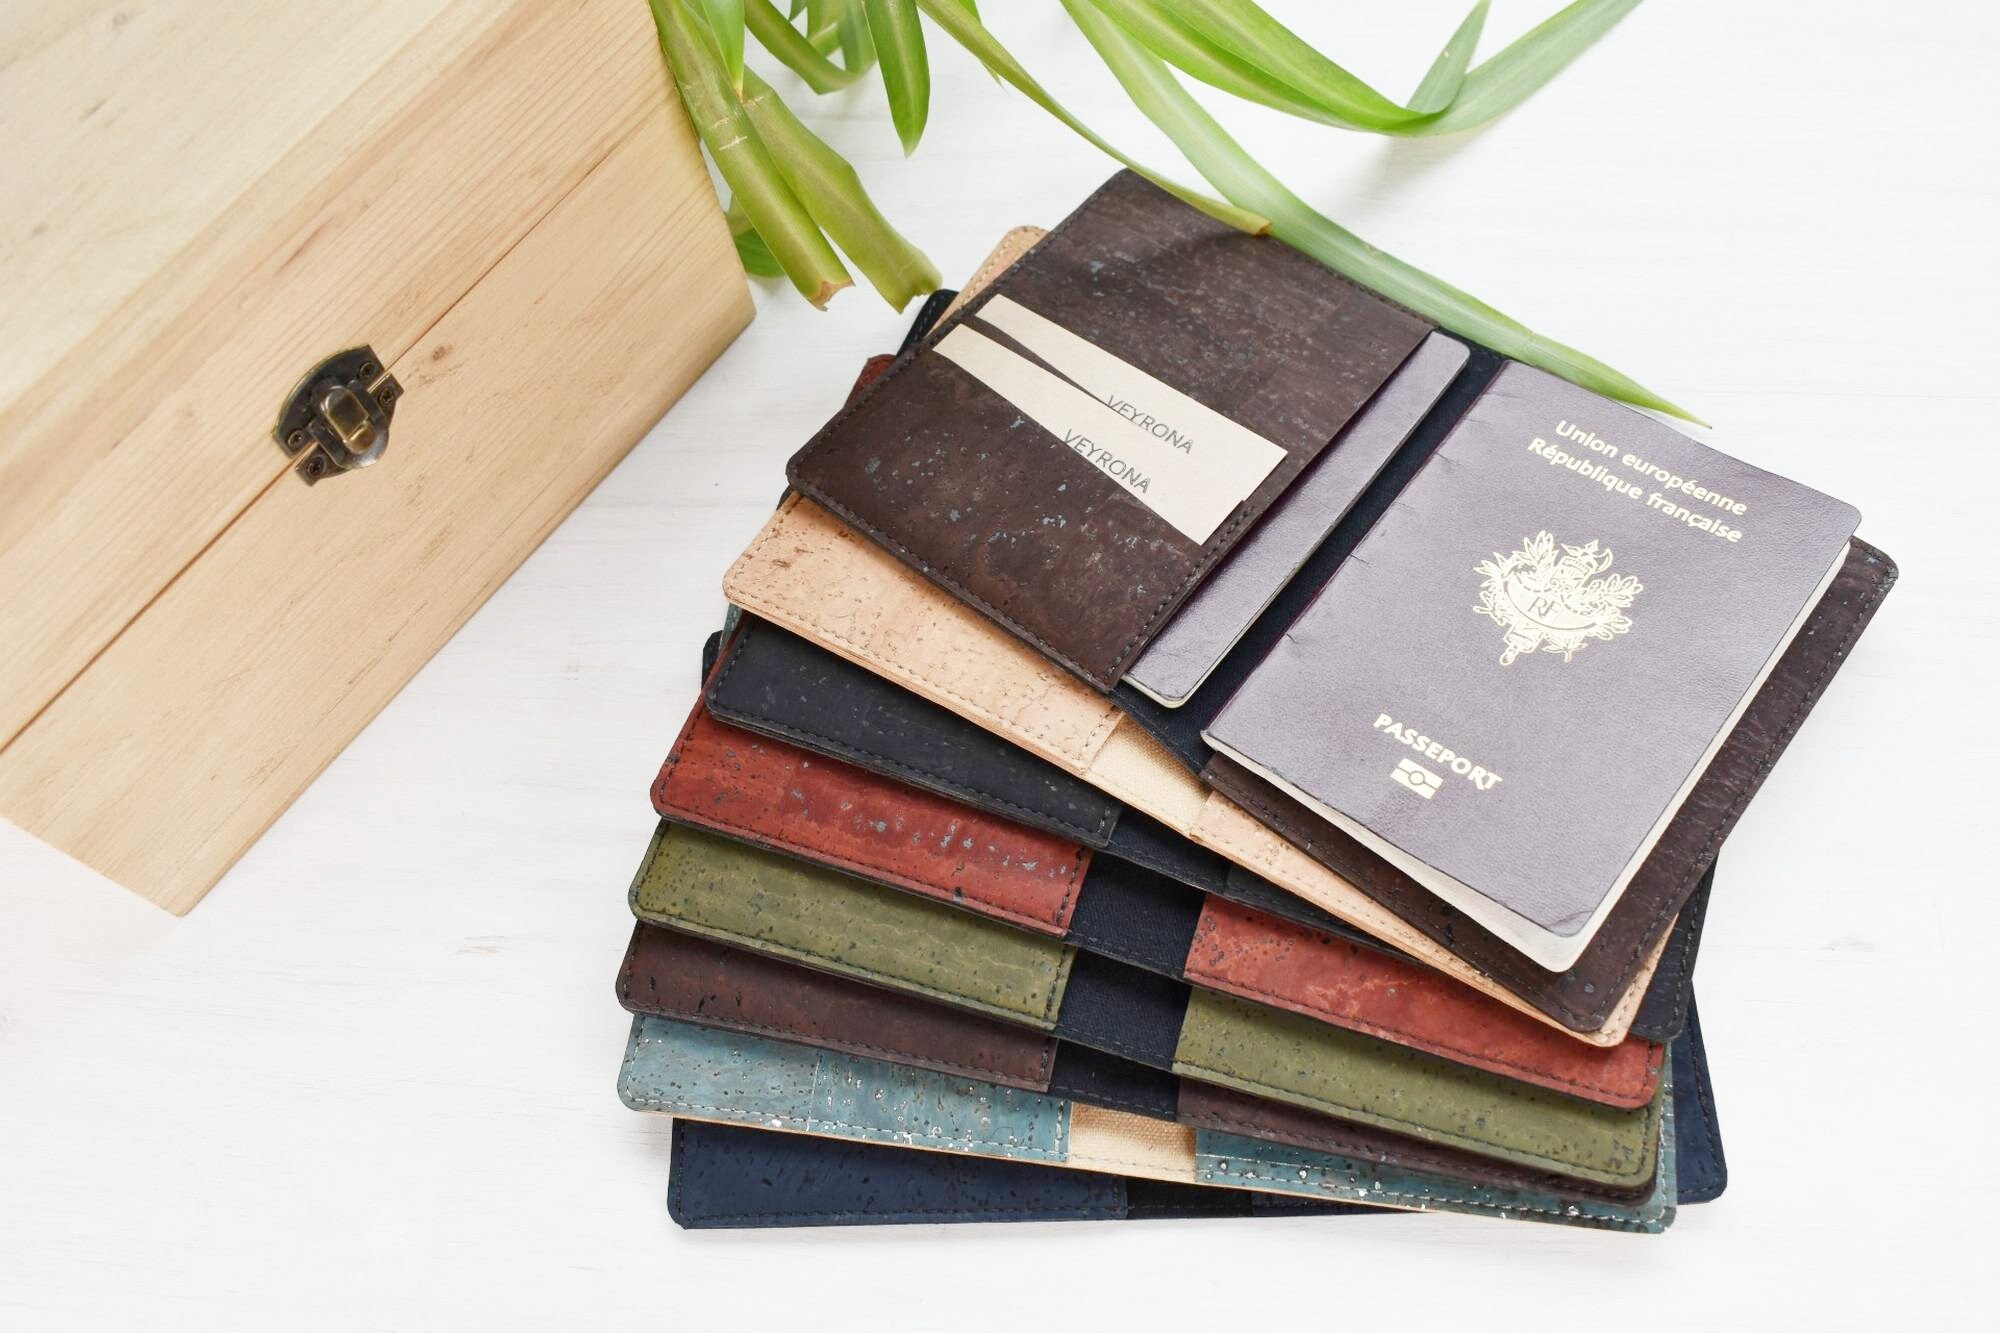 Enveloppe Carte De Visite Taiga Leather - Wallets and Small